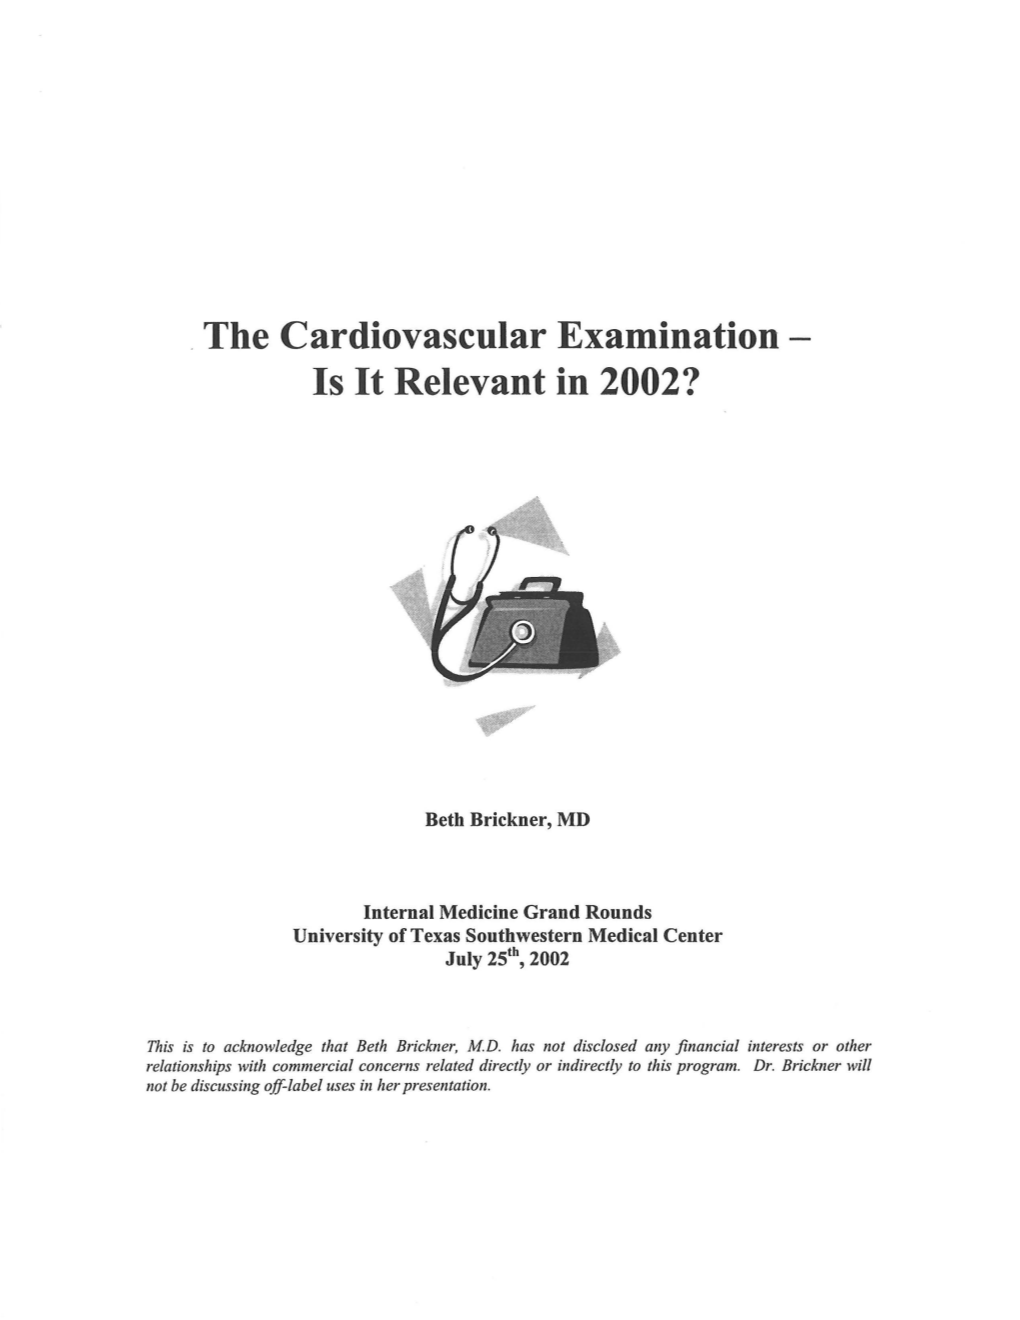 The Cardiovascular Examination Is It Relevant in 2002?